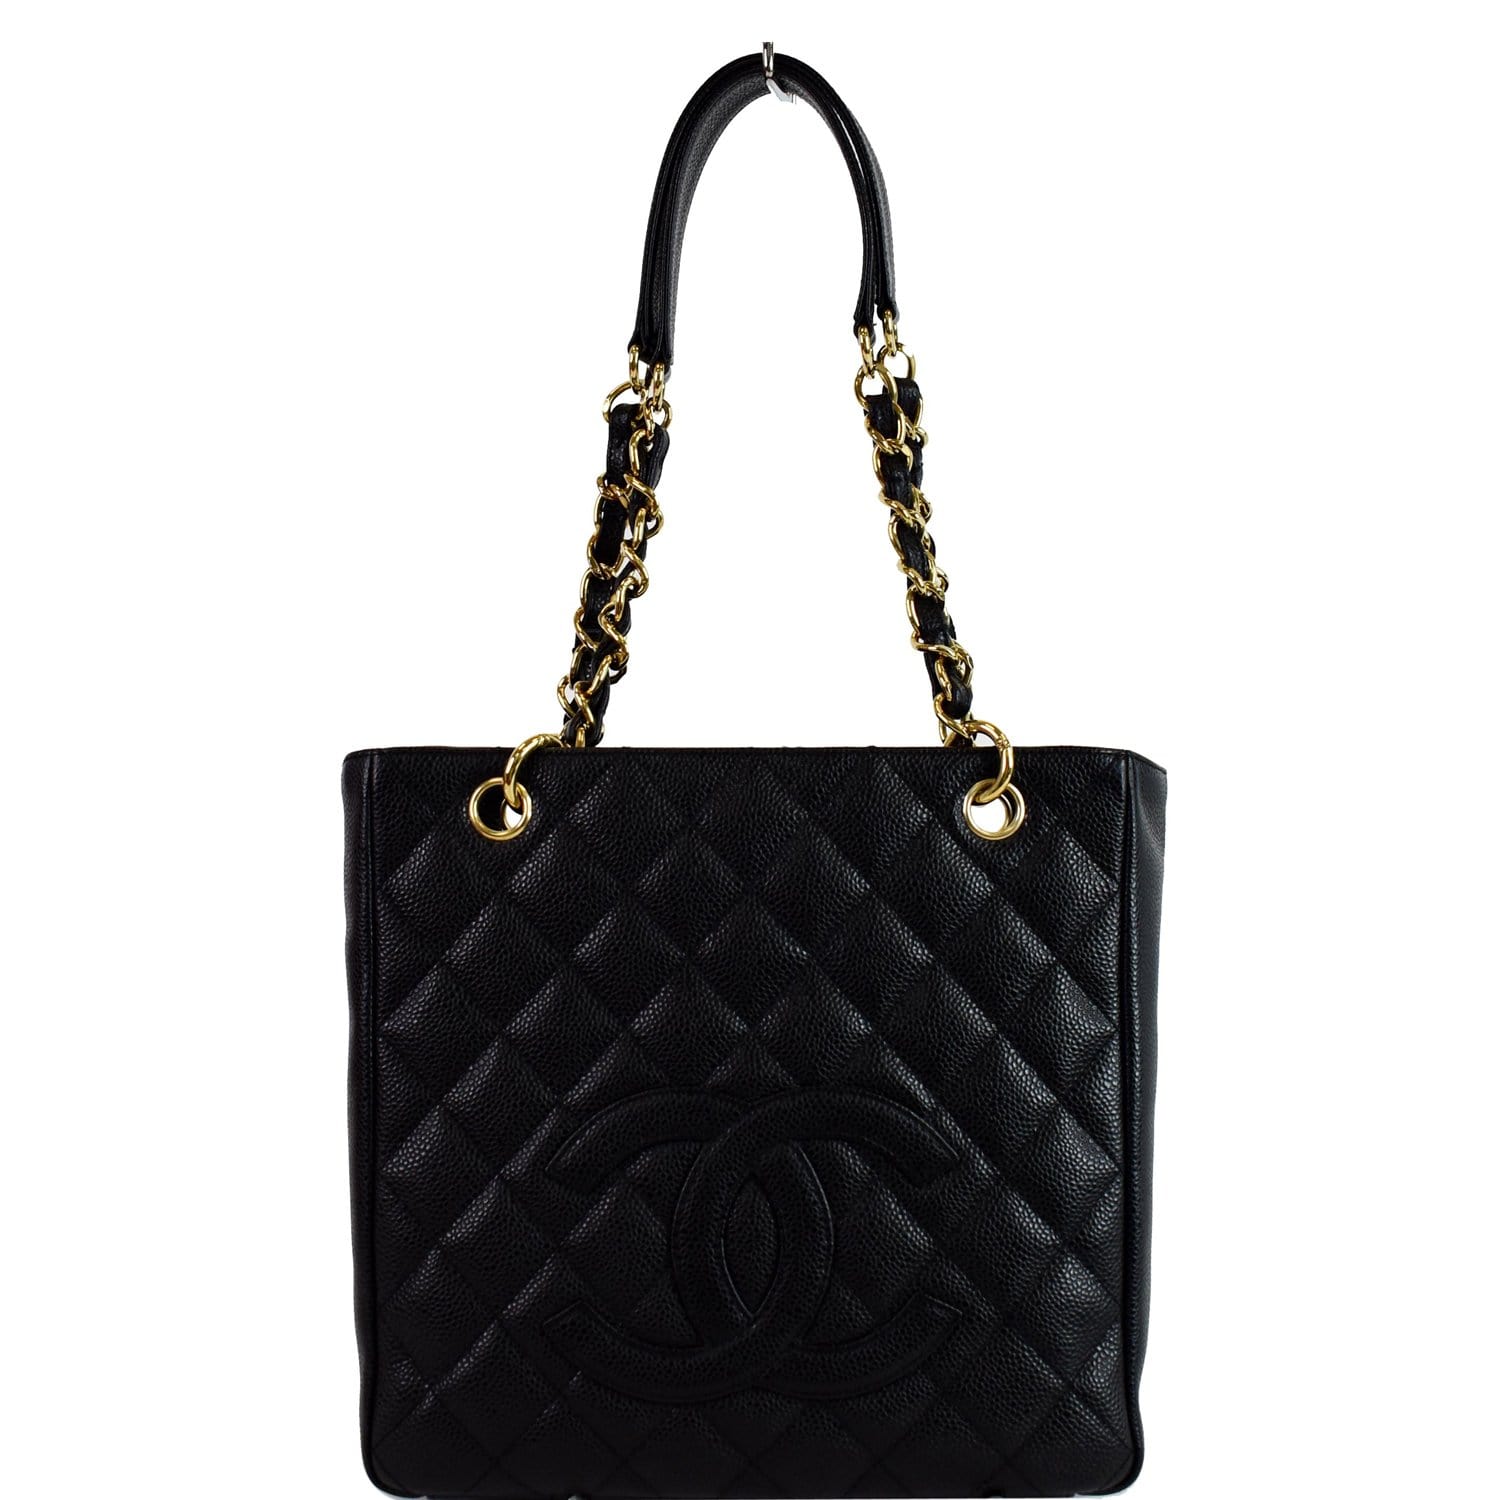 Chanel Petite Shopping Tote leather tote - ShopStyle